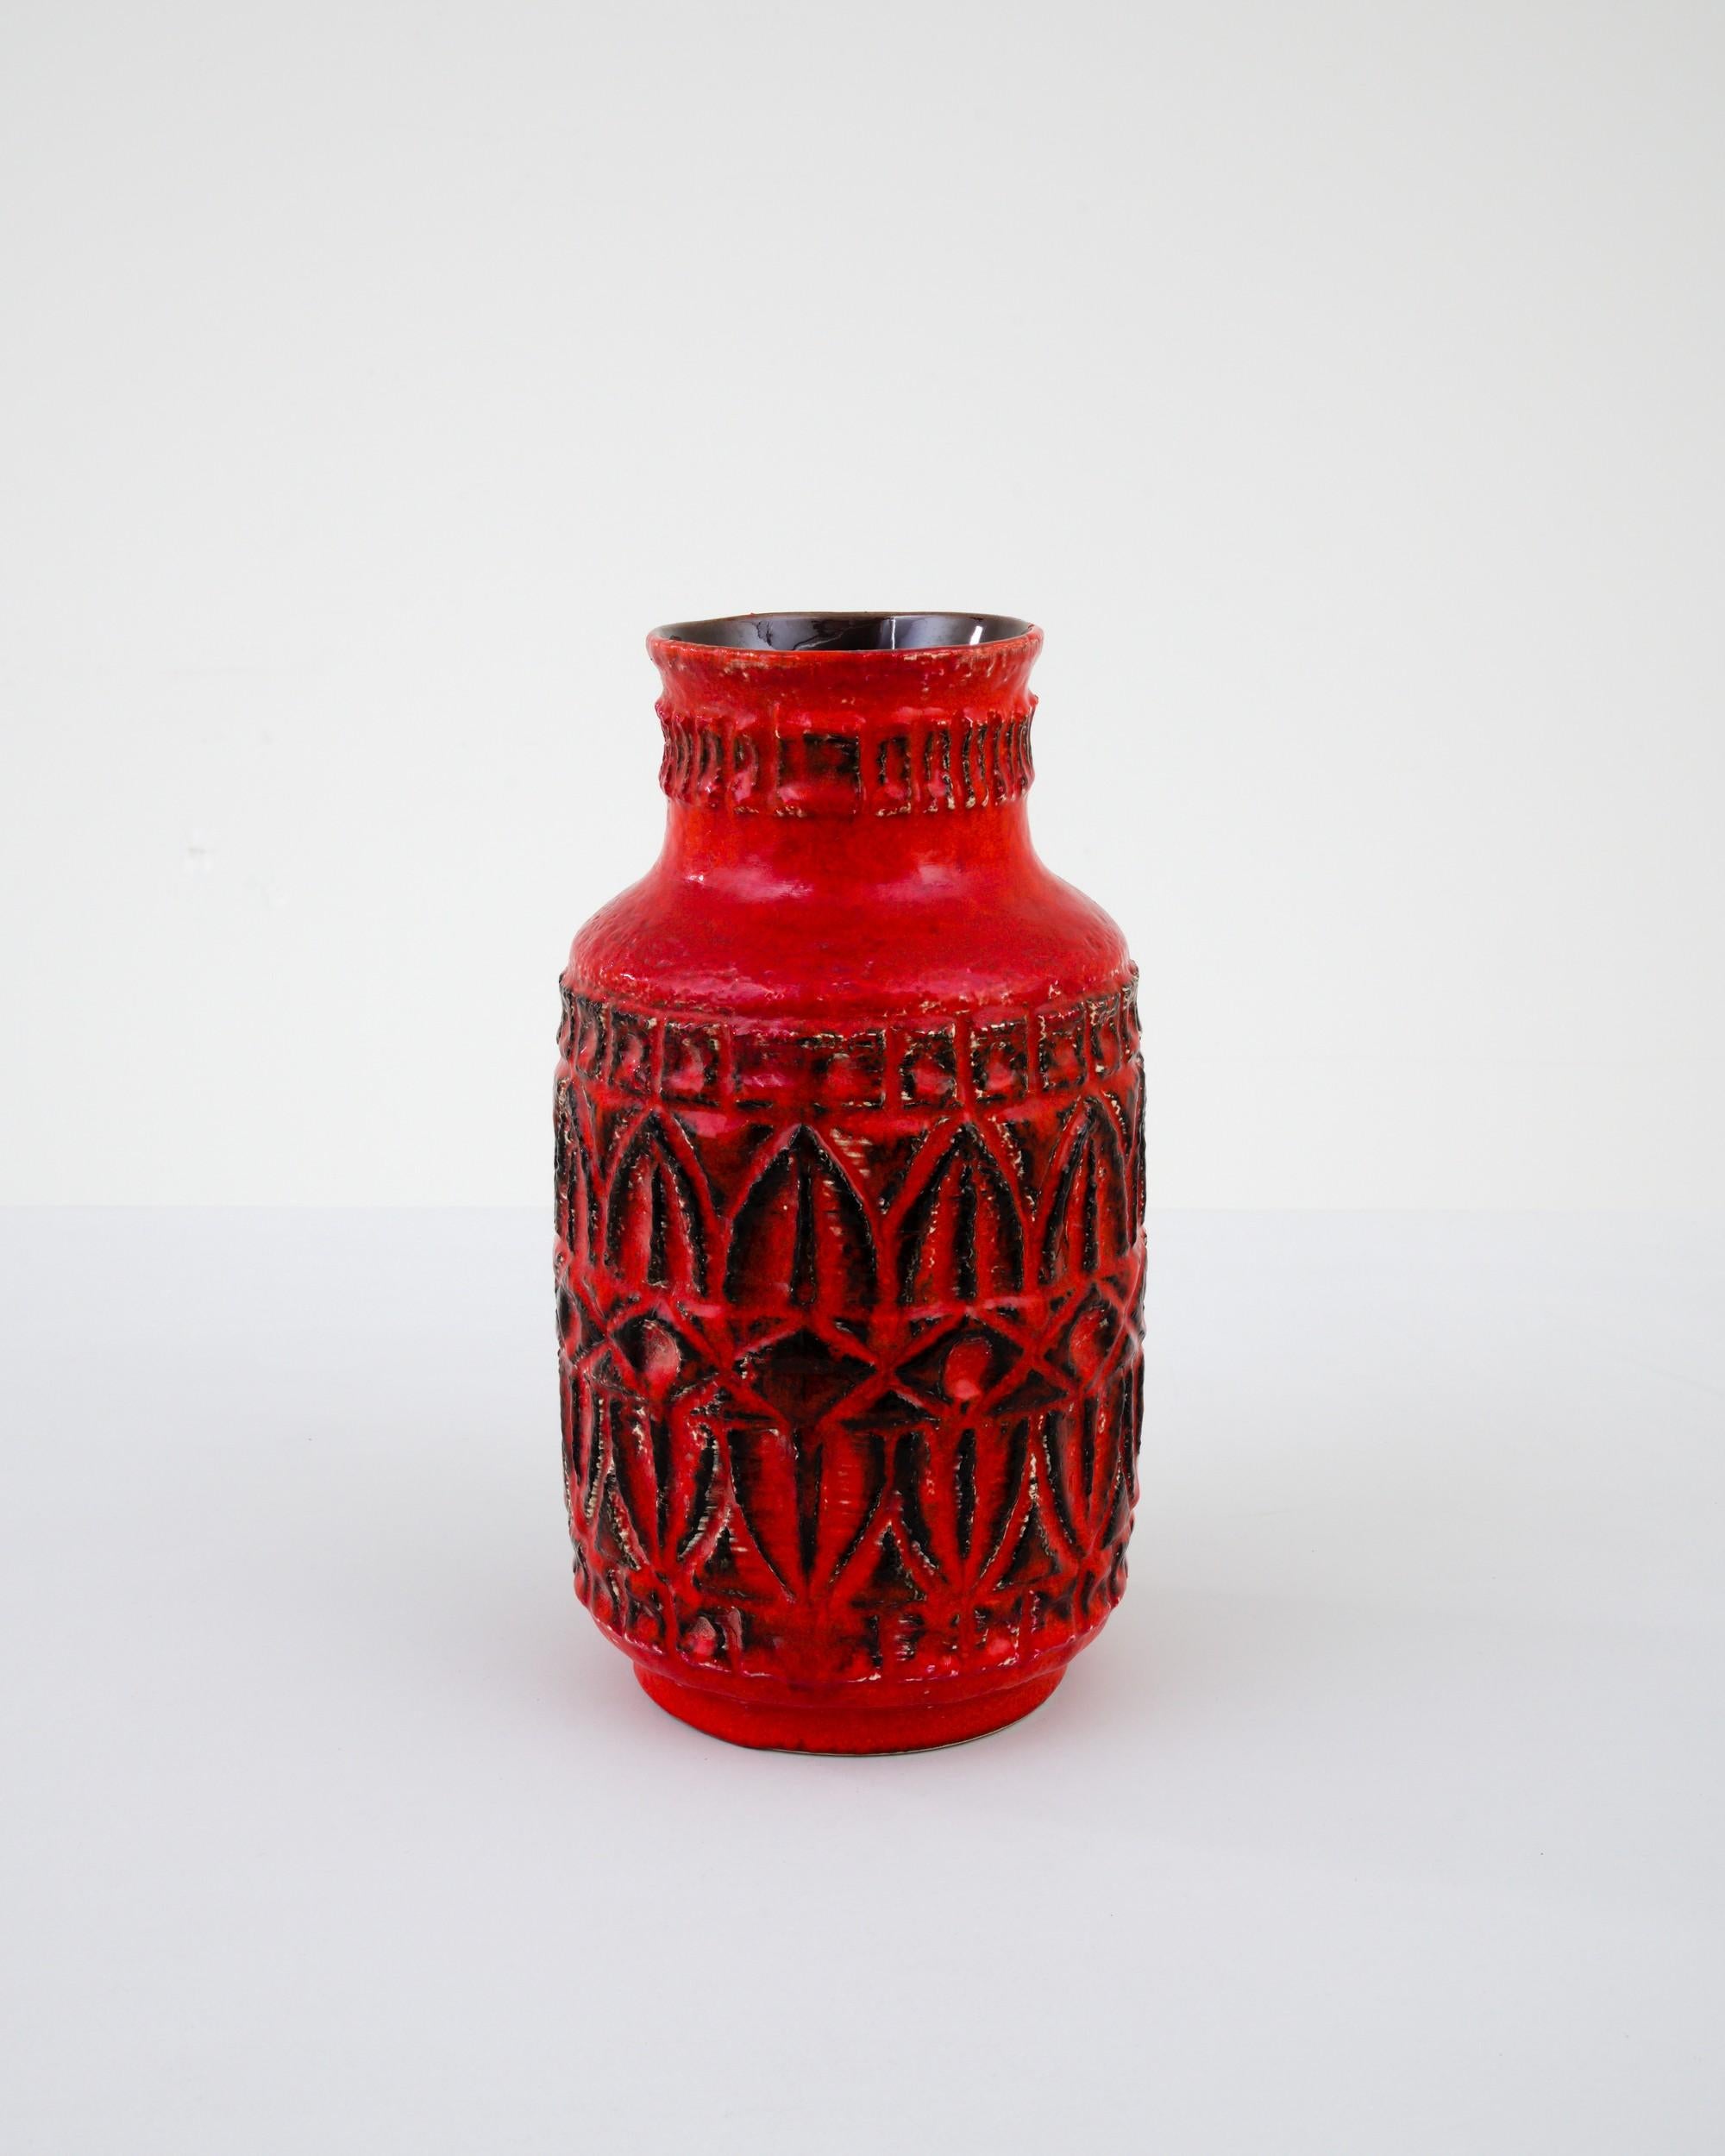 A ceramic vase from mid-20th century Germany. Neither large nor small, this studio made pot reflects the hand-held, and the handmade; the tactility of process and the artist's vision– realized on the potter’s wheel. Patterned red adorns a minimal